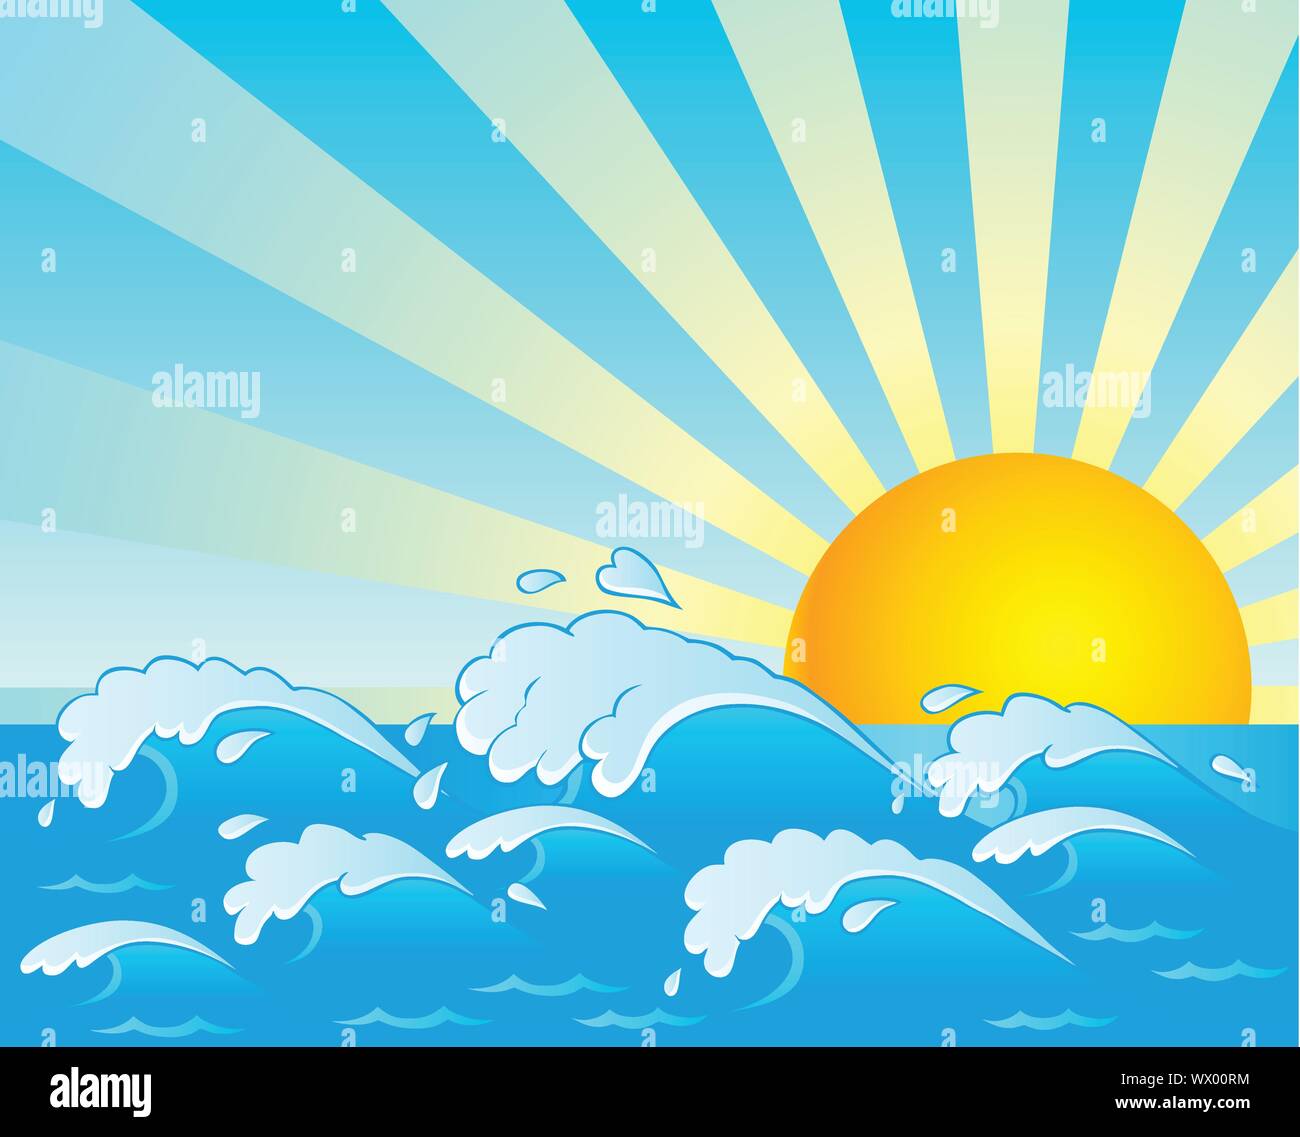 Waves theme image 4 Stock Vector